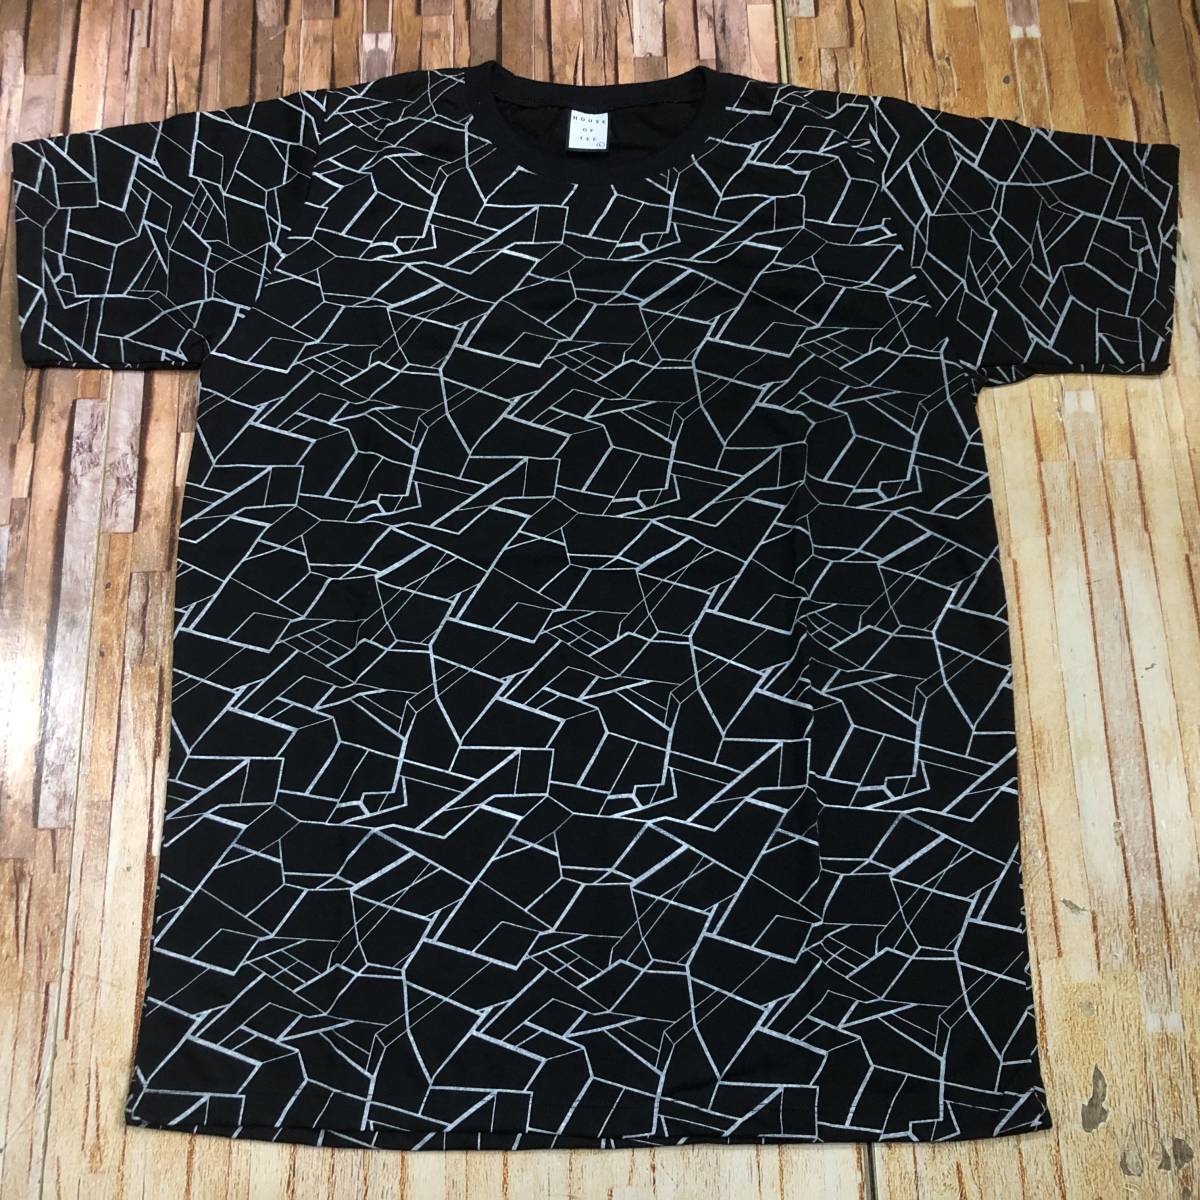  new goods * prompt decision * click post shipping * van kok departure \'HOUSE OF TEE\'. hand ... geometrical pattern ... Monotone pattern. total pattern print T-shirt * black *M